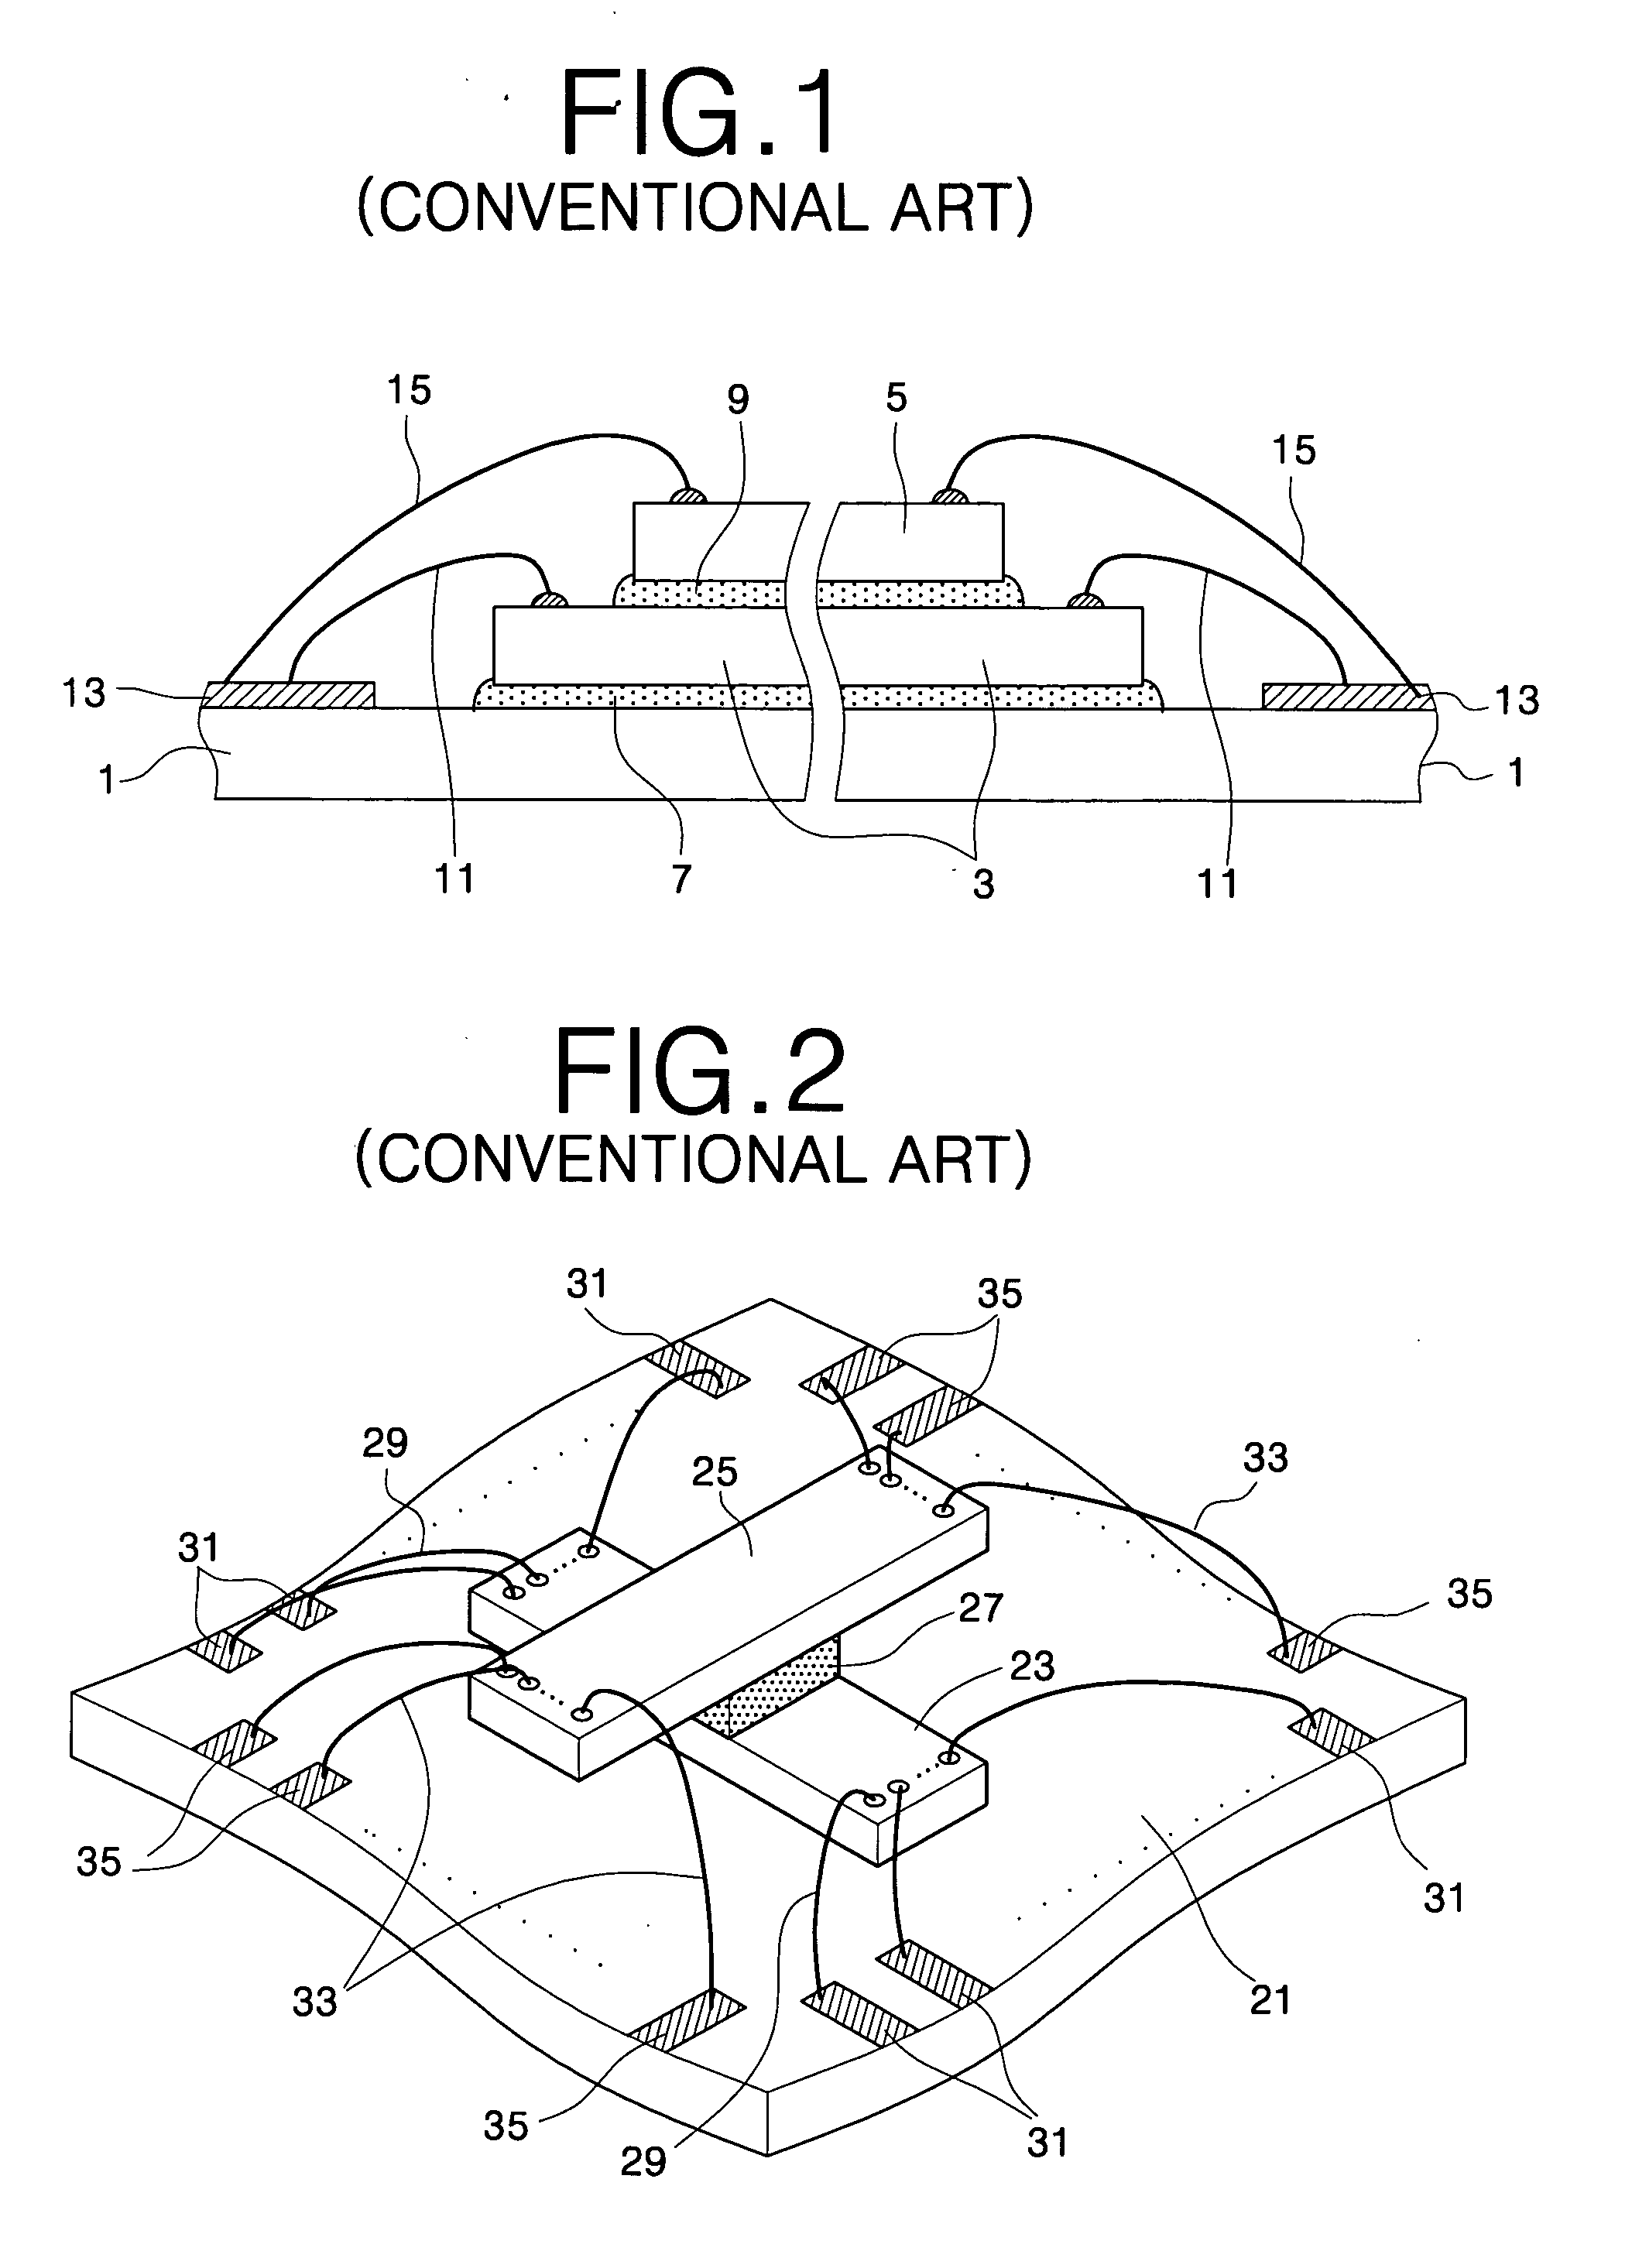 Multi-chip packages having a plurality of flip chips and methods of manufacturing the same